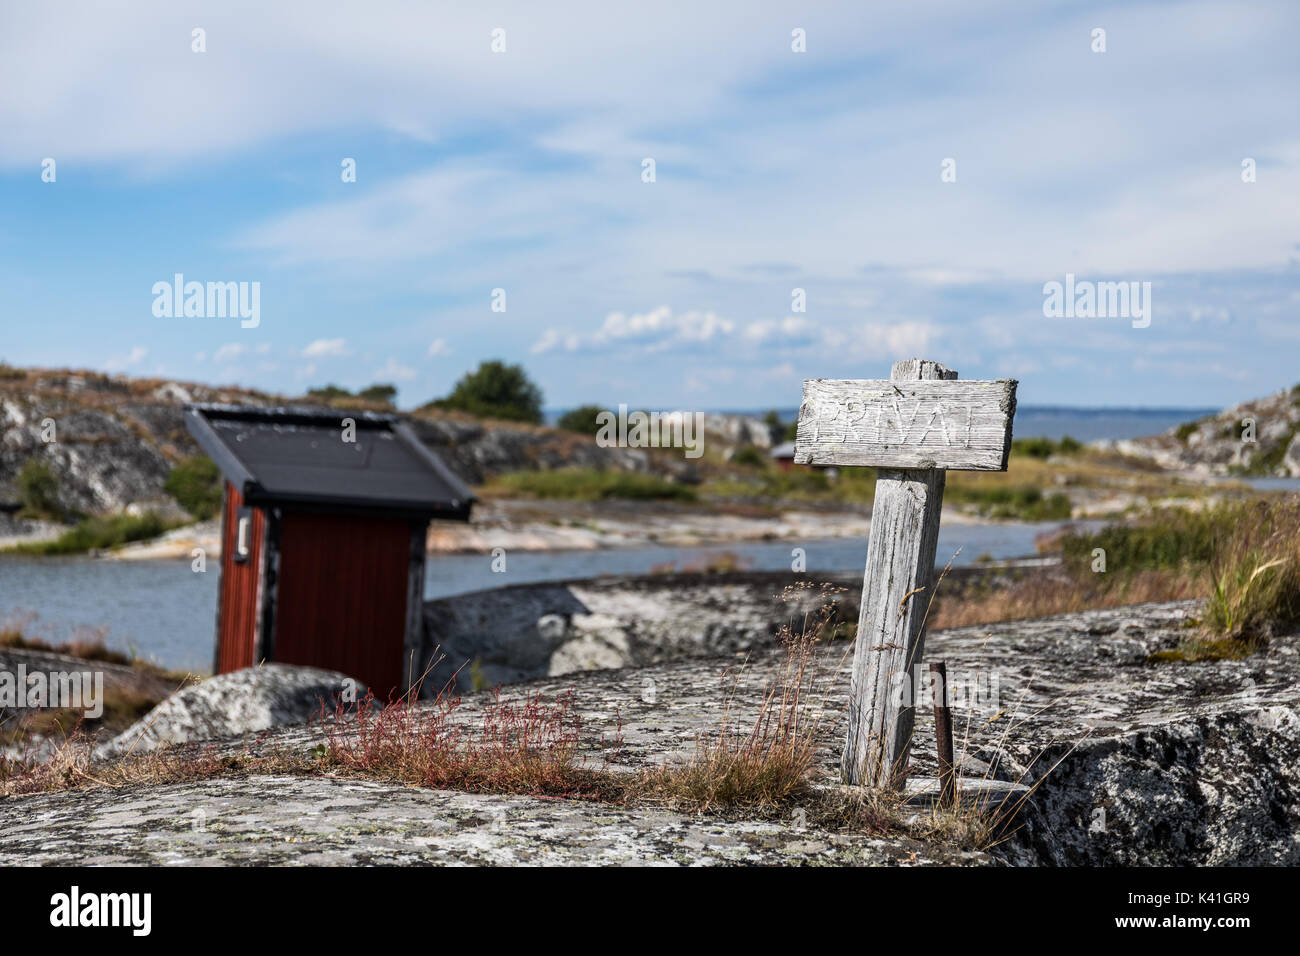 An old weatherbeaten warning sign with the text private tells people to stay away on an island in the Stockholm archipelago Stock Photo